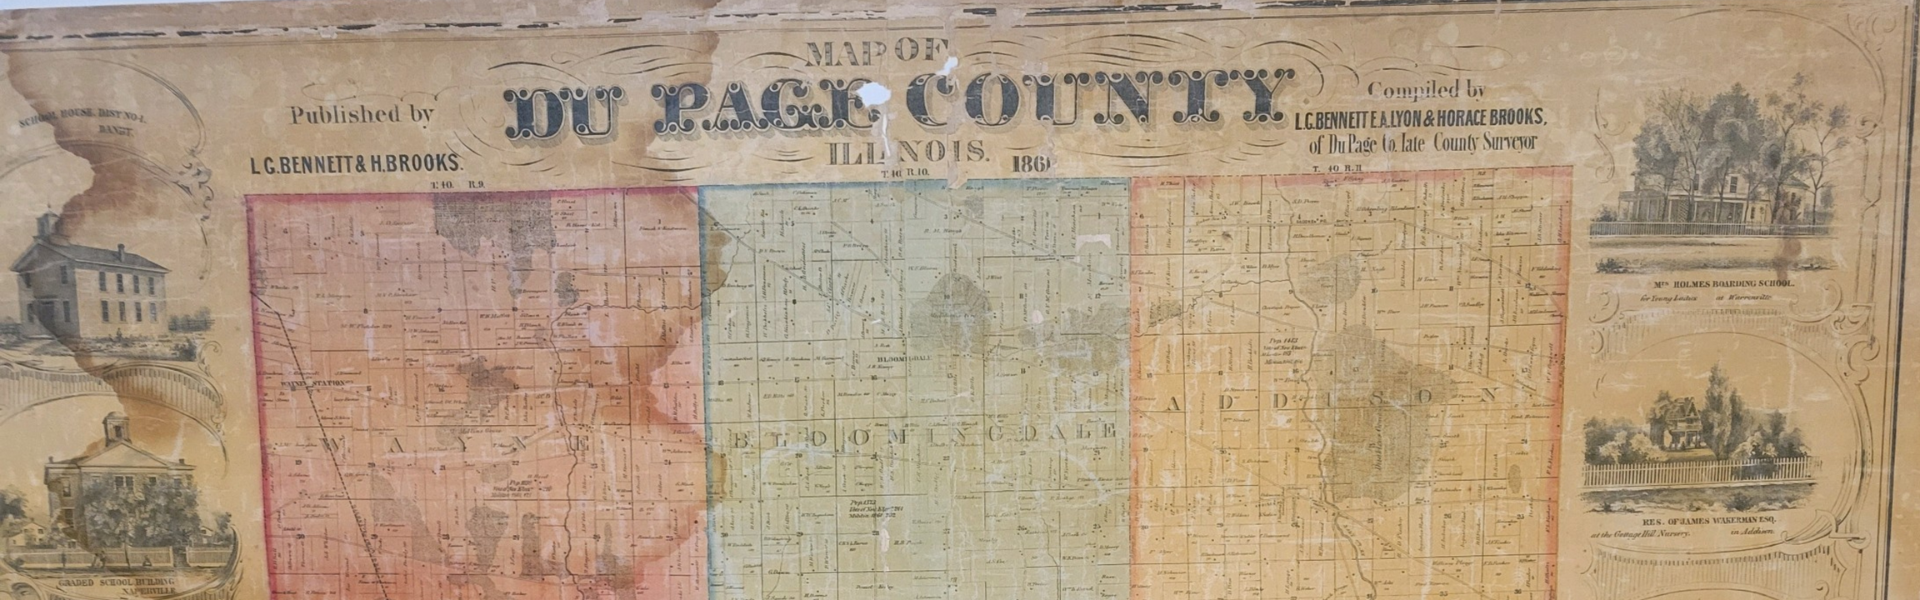 Maps in Genealogical Research